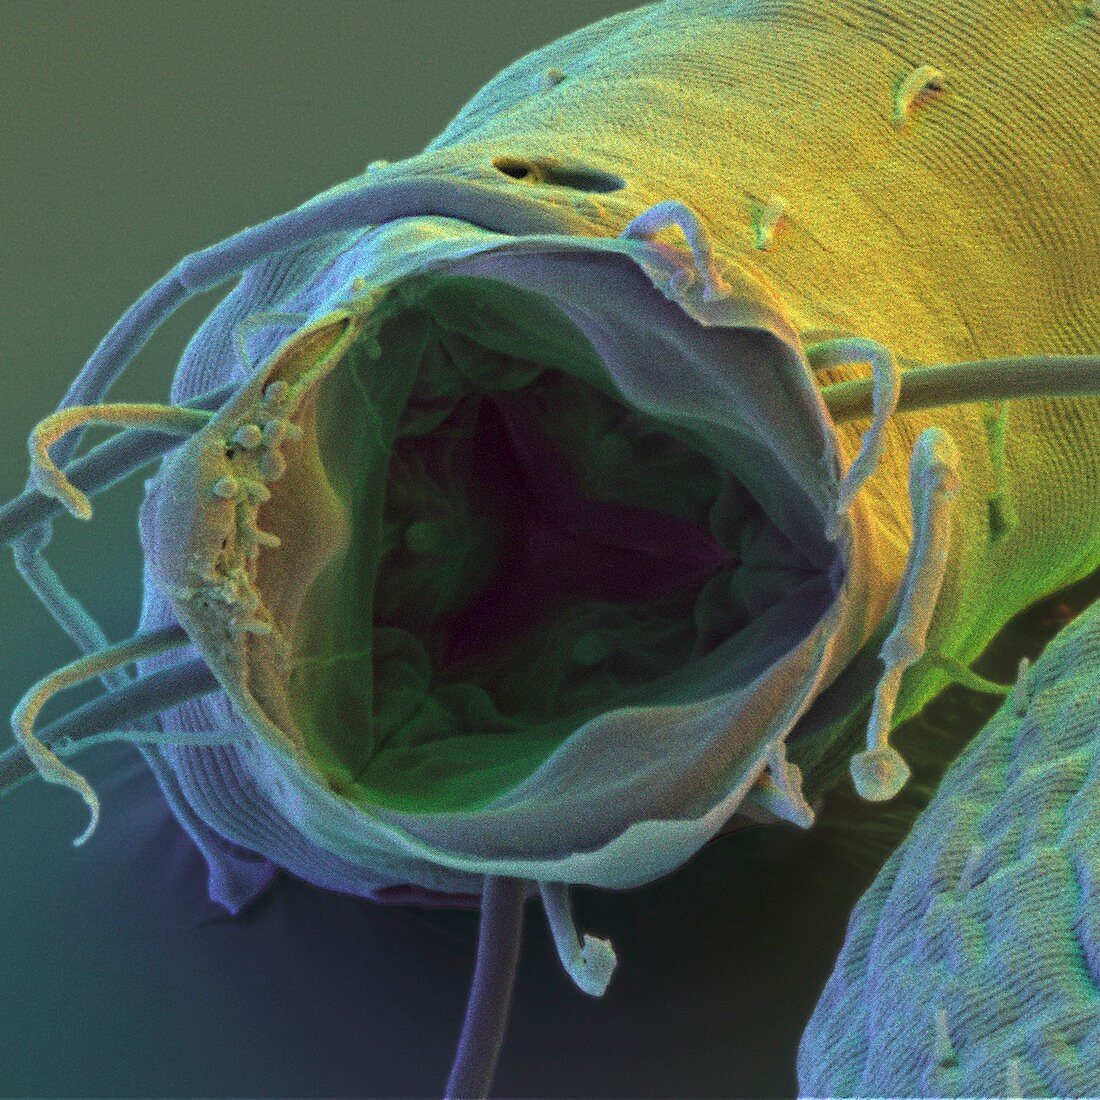 Coloured SEM of the mouth of Enoplid nematode worm